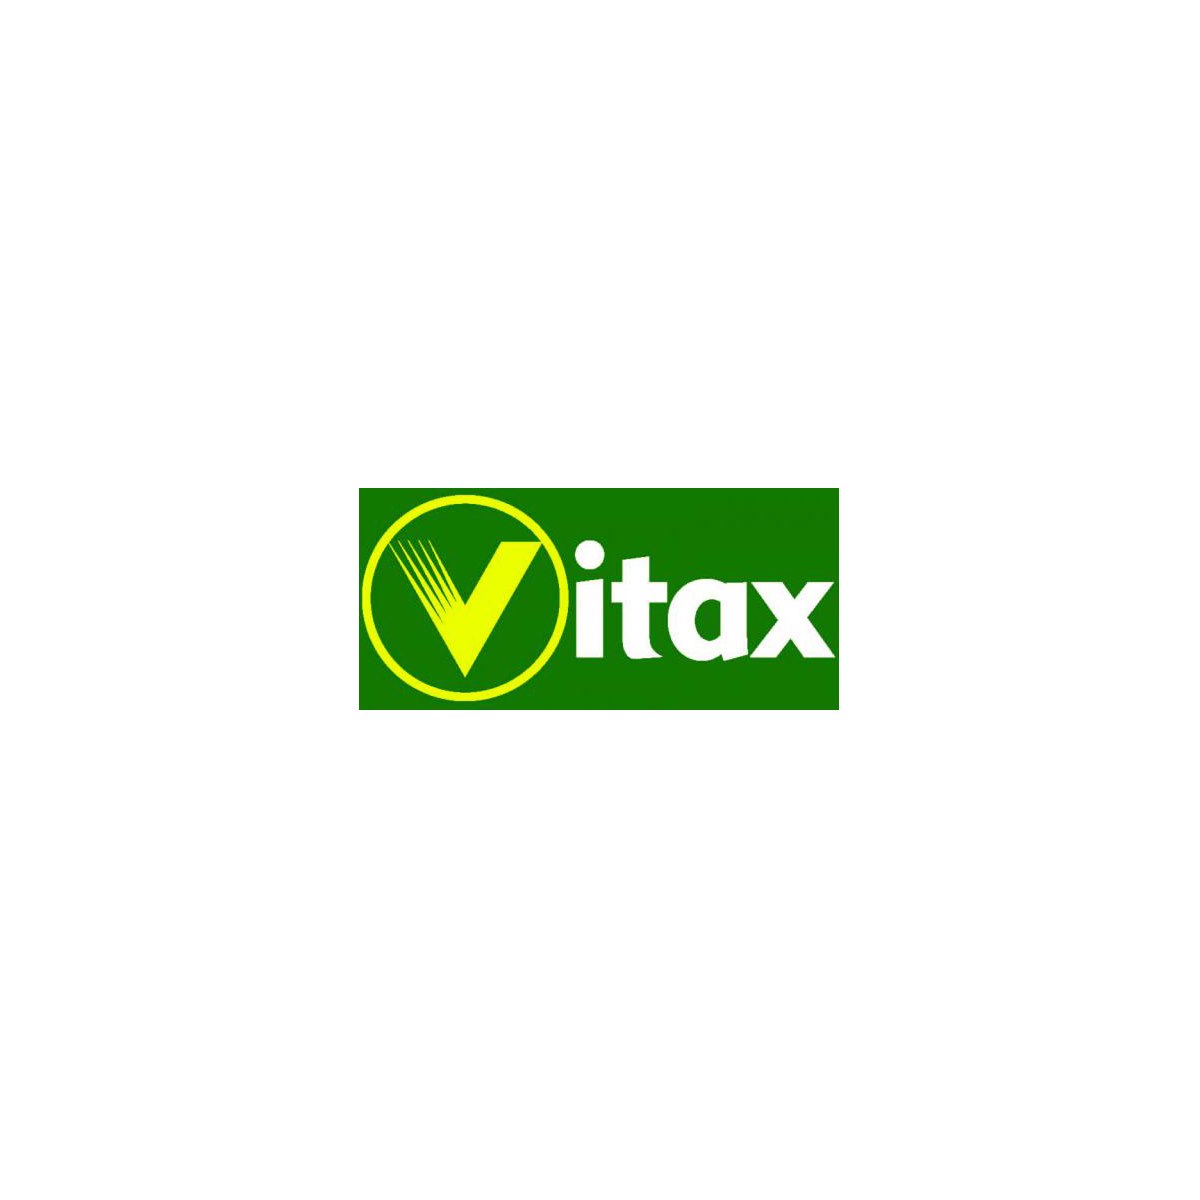 Where to Buy Vitax Products